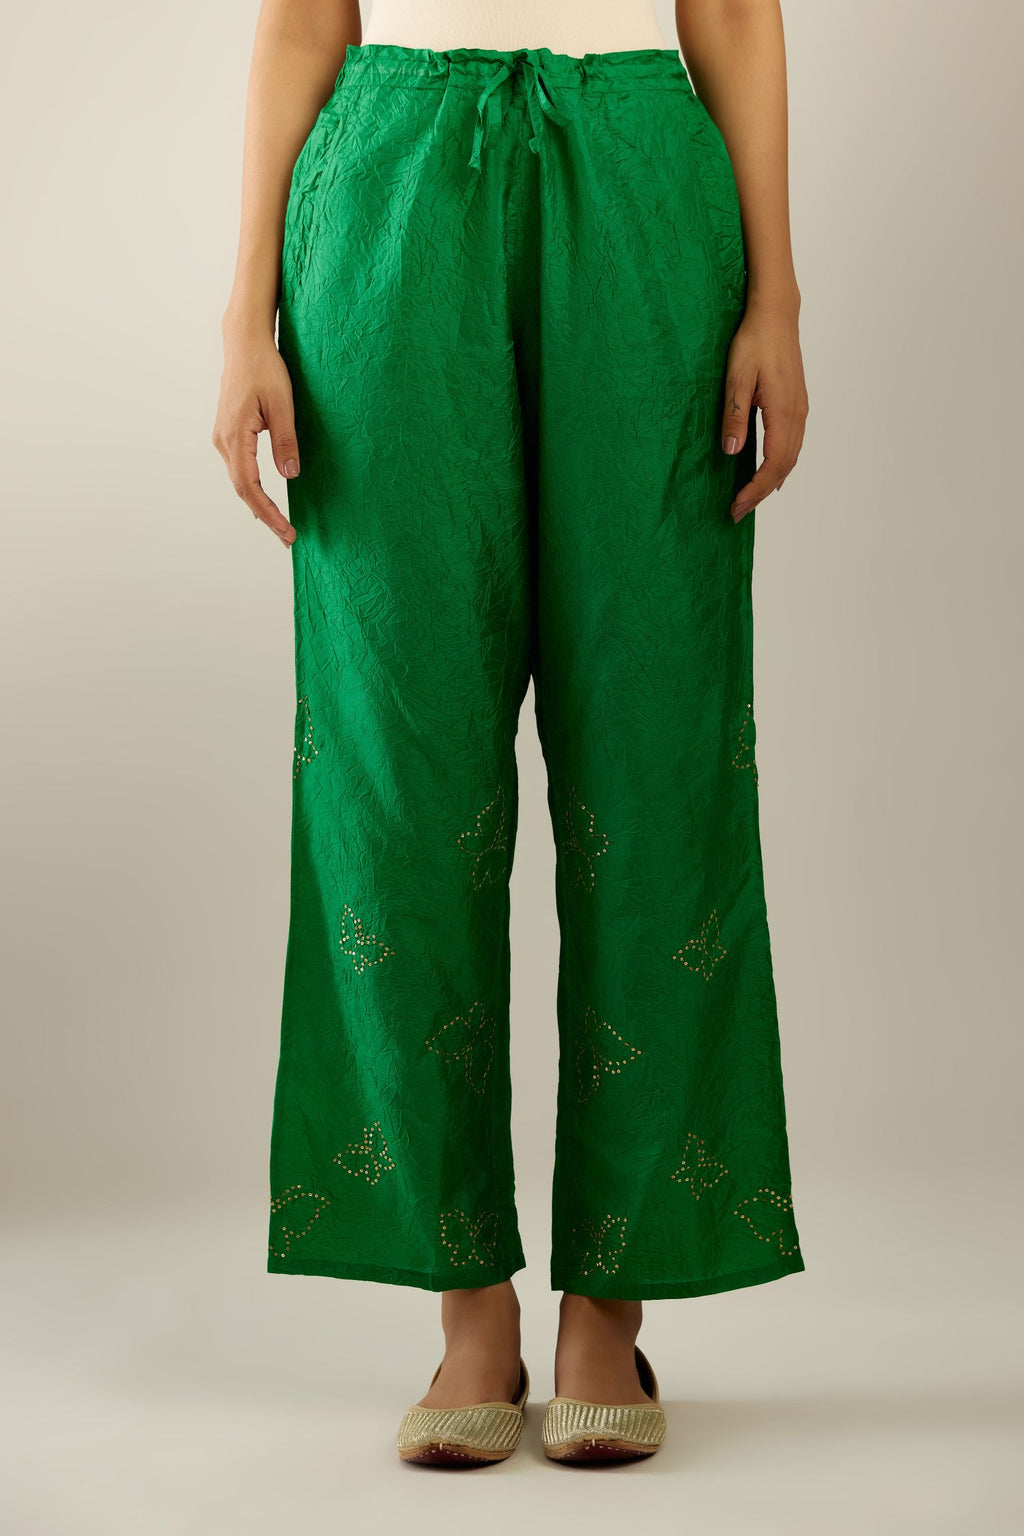 Grass green crushed silk pants with side pockets and assorted sequined butterflies till mid-calf length.